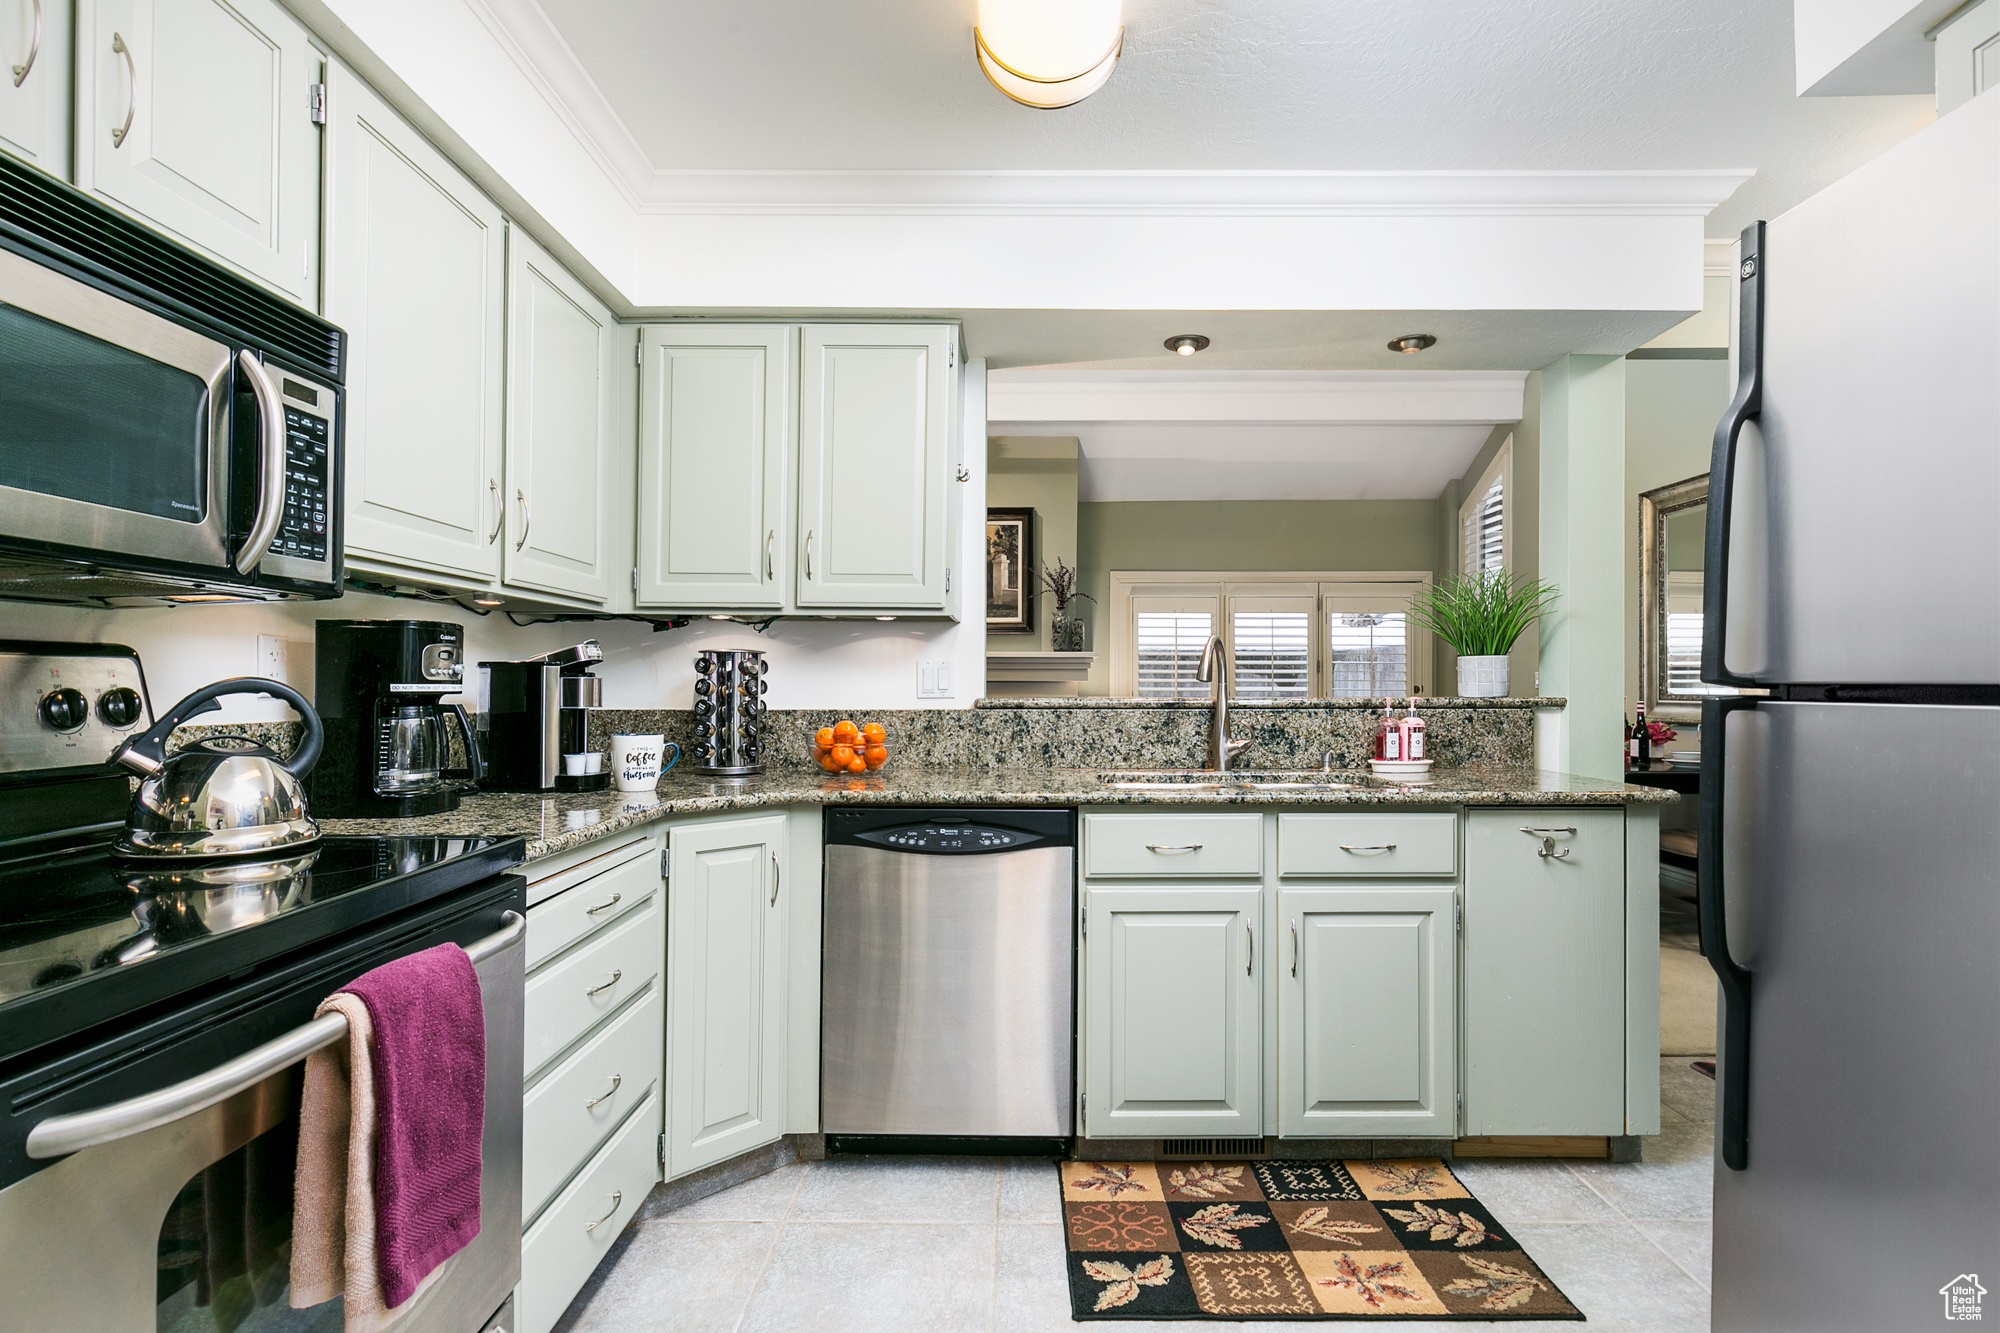 Kitchen featuring ornamental molding, granite countertops, and appliances with stainless steel finishes